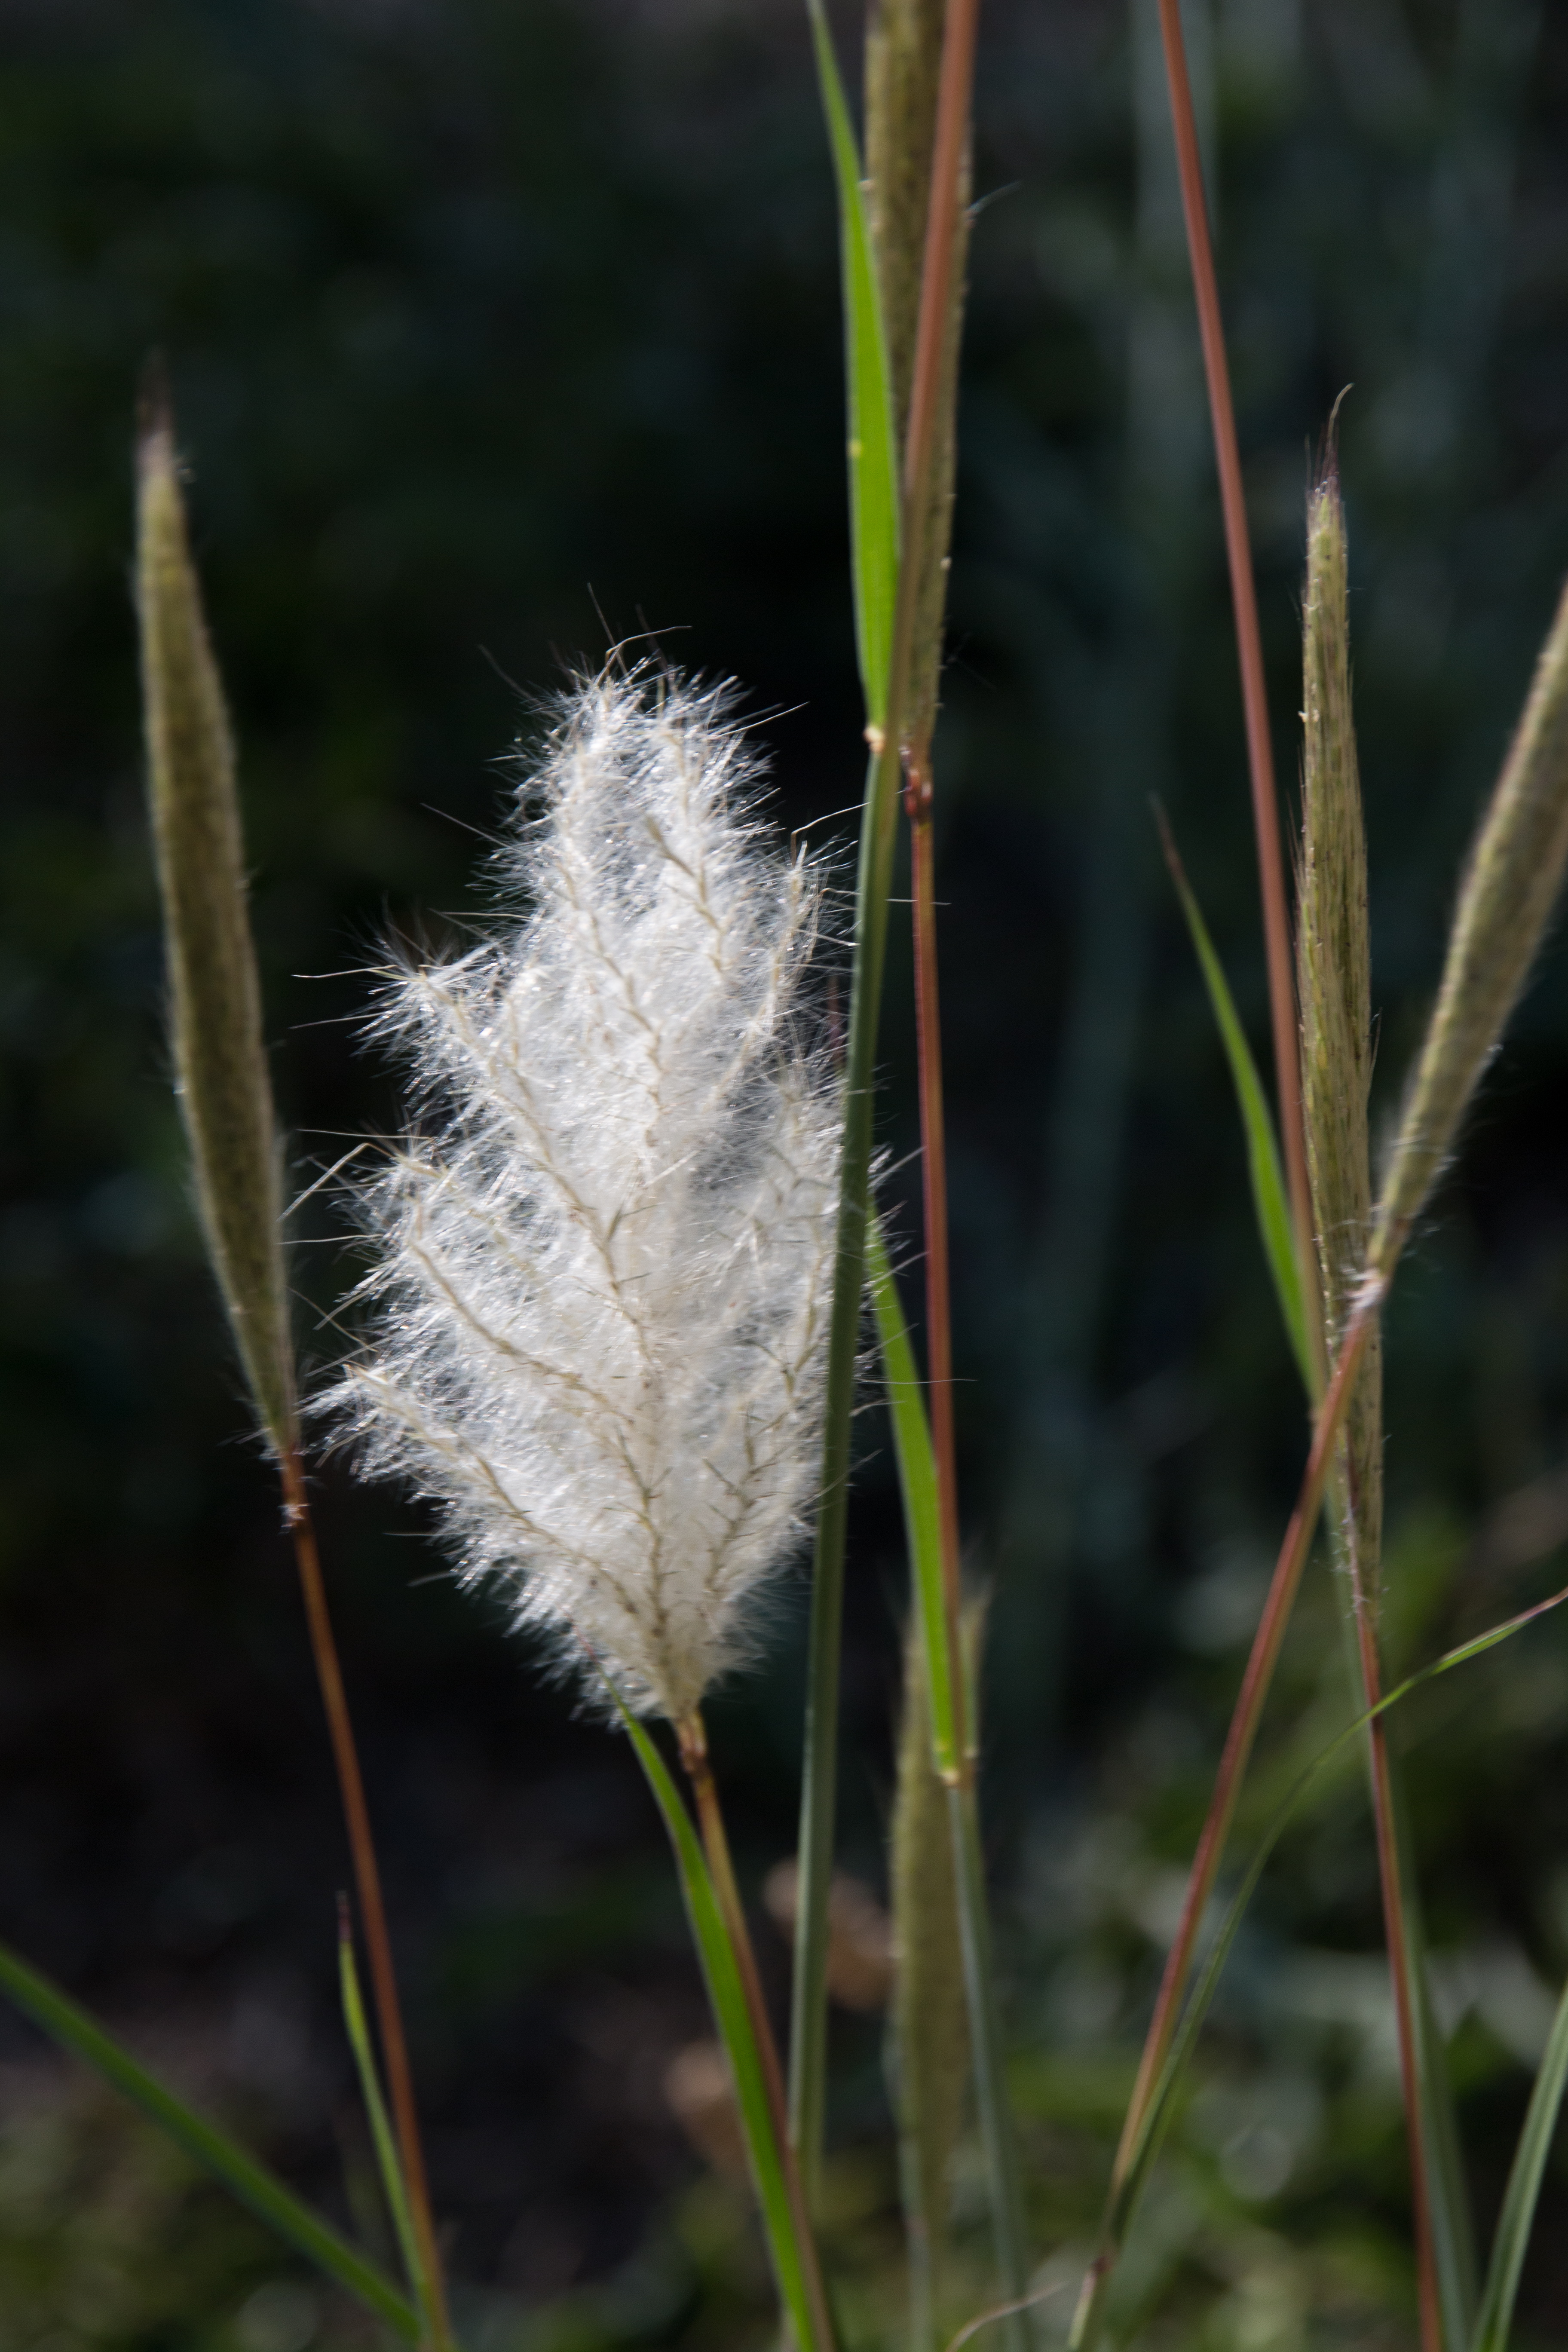 A branched, white inflorescence (panicle) with fuzzy texture